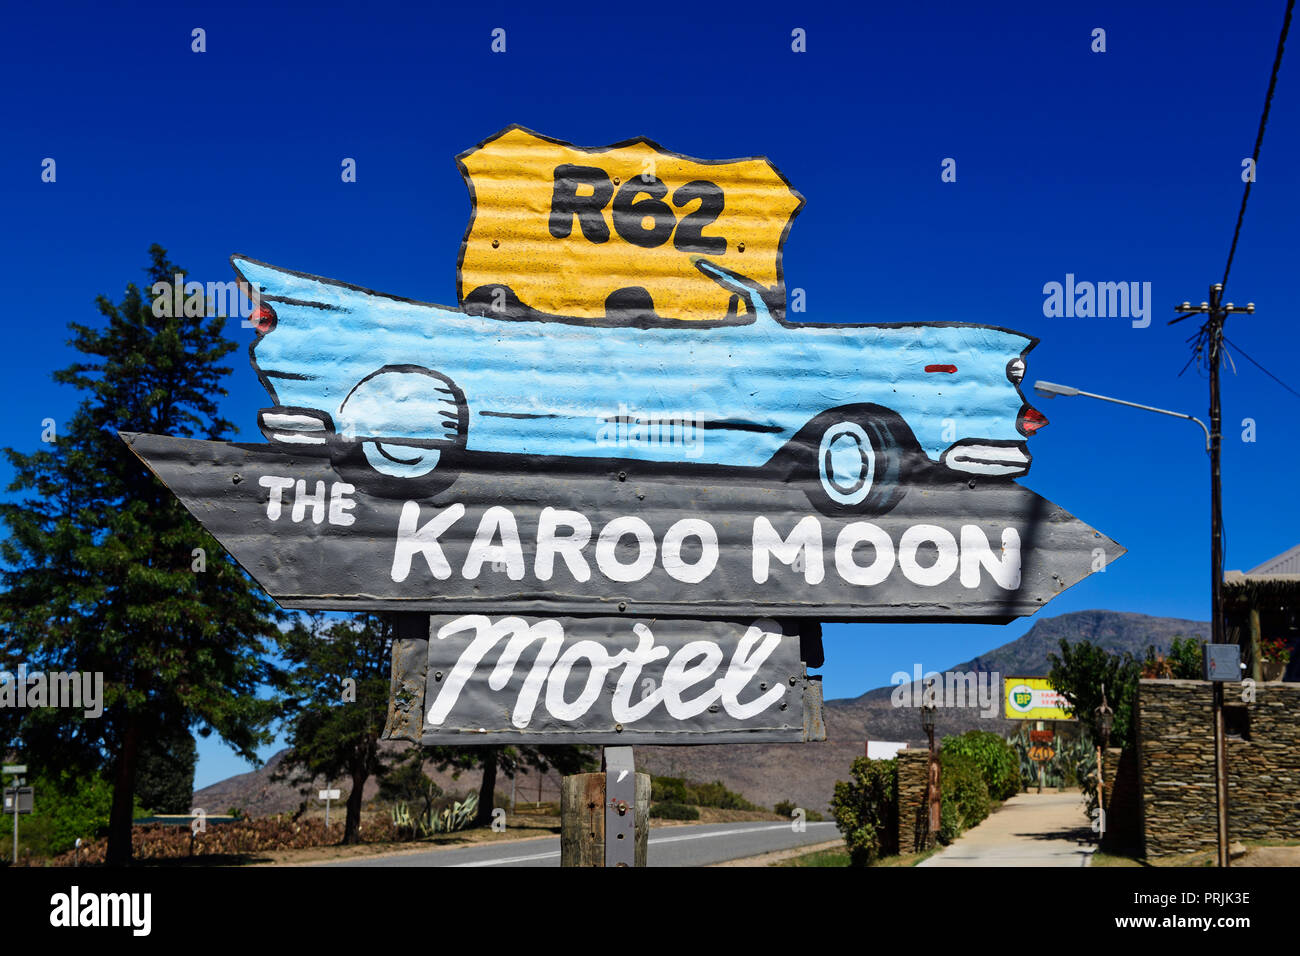 Karoo Moon Hotel, sign, Route 62, Barrydale, South Africa Stock Photo